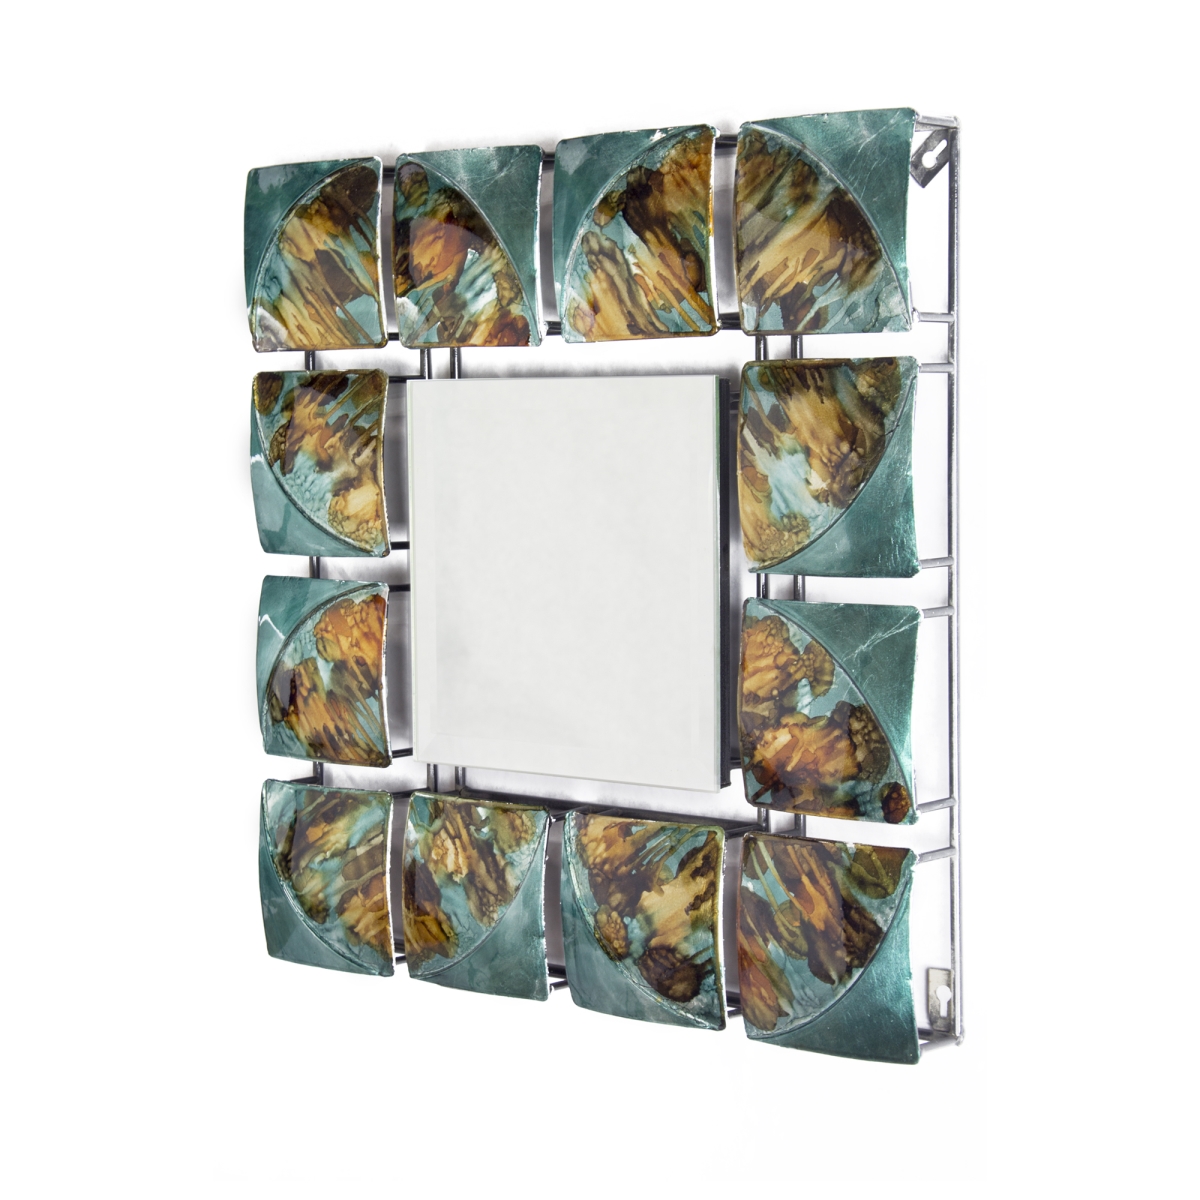 W08639-04 Tinsley Square Foiled & Lacquered Hanging Wall Mirror, Turquoise, Copper & Bronze - 1.75 X 17.5 X 17.5 In.